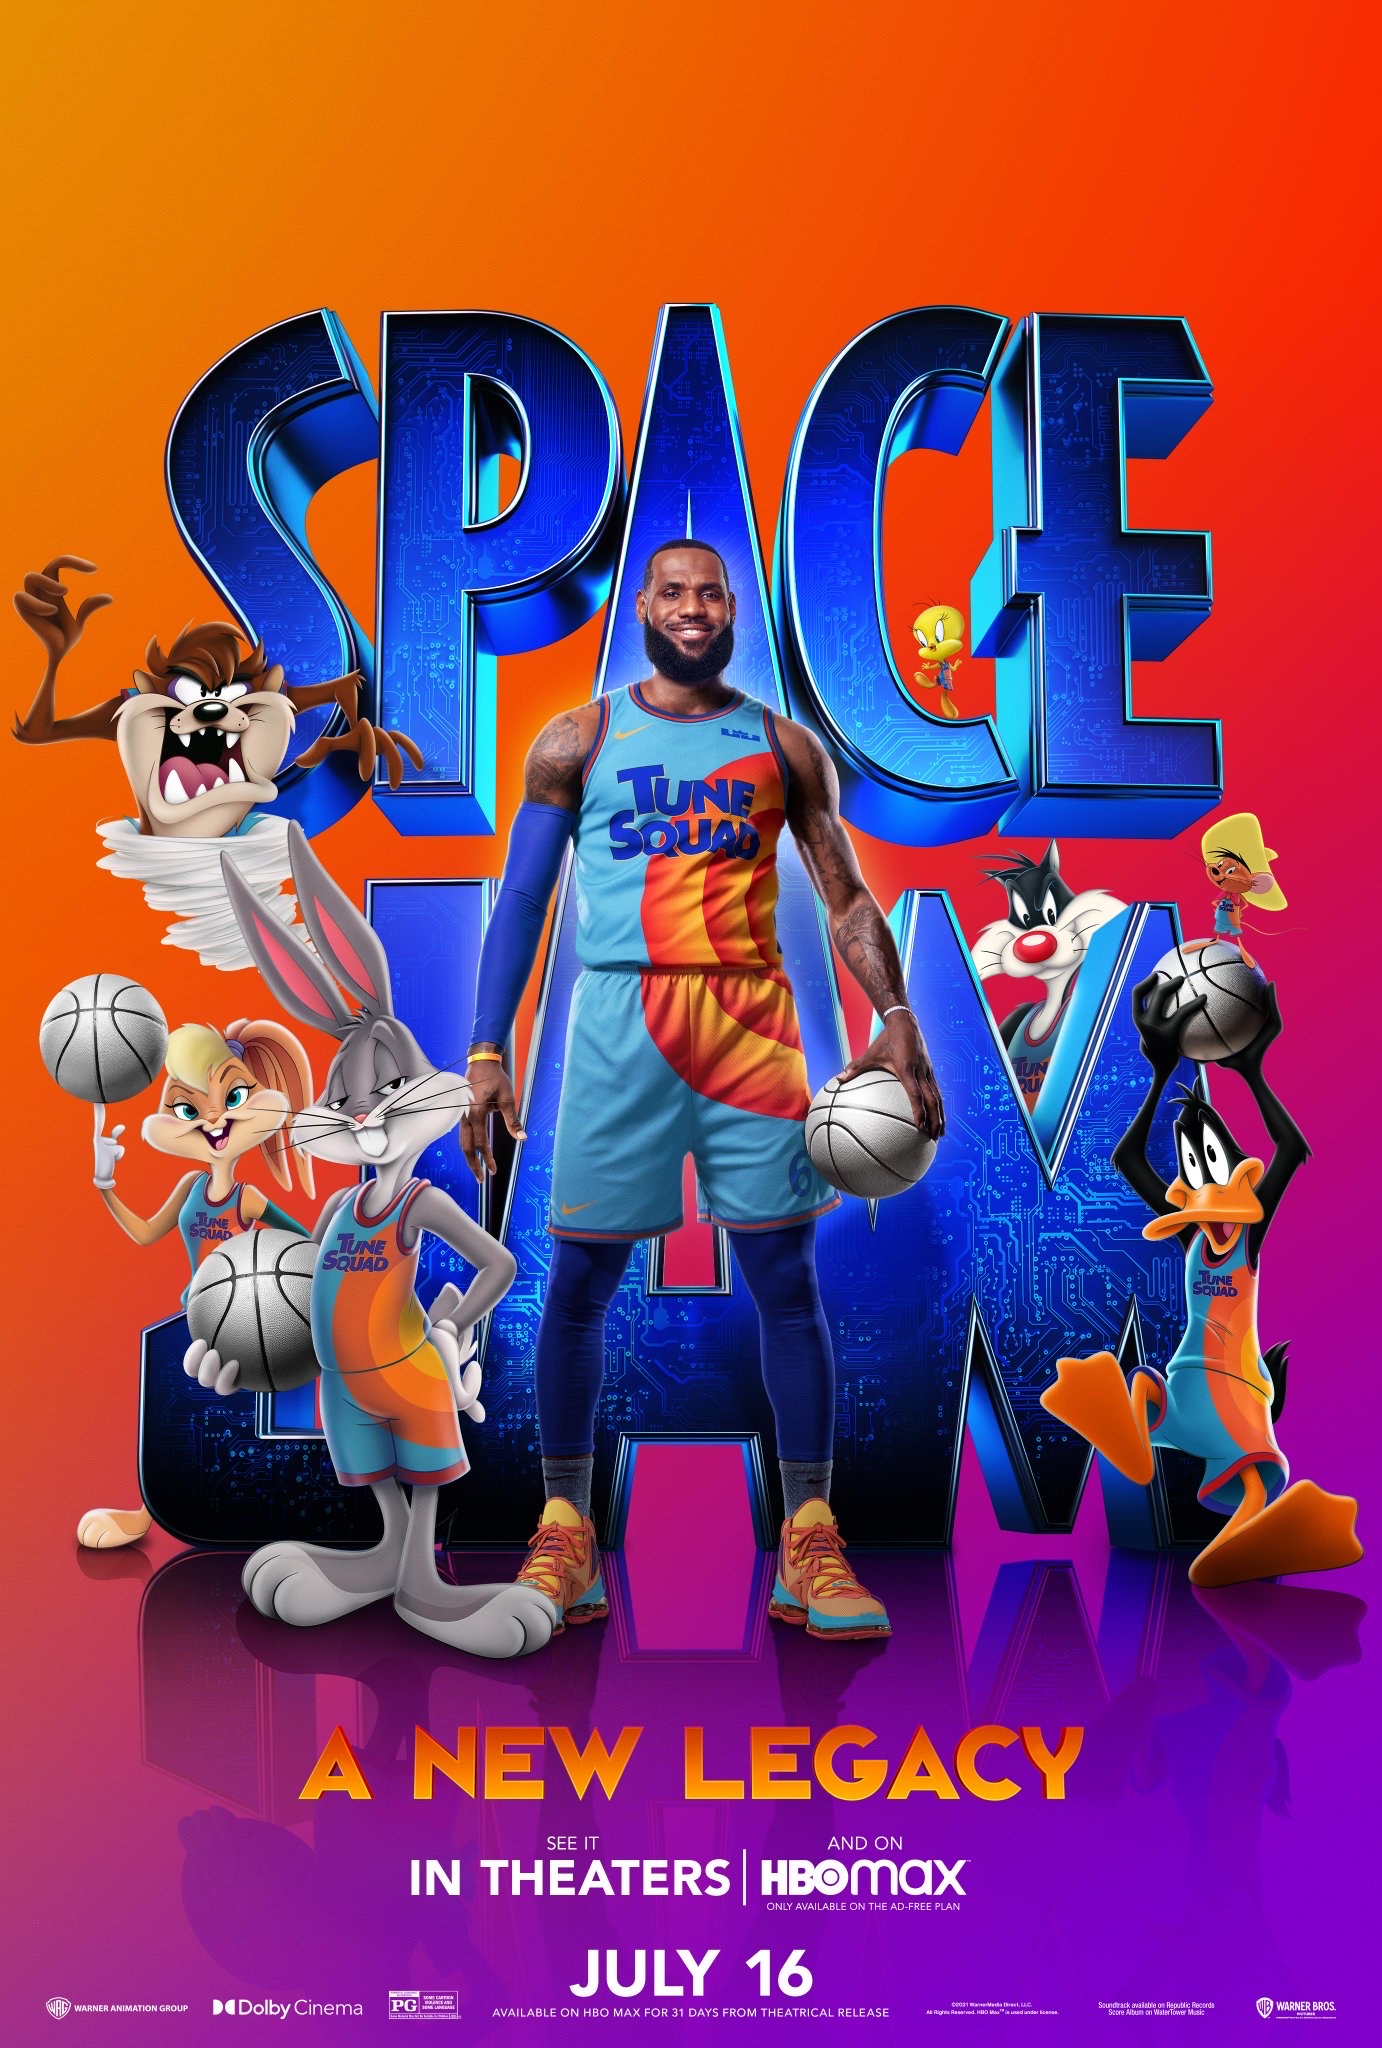 Space Jam: A New Legacy on X: From the Tune Squad to you - we wish your  dads and father figures a Happy Father's Day! #SpaceJamMovie   / X